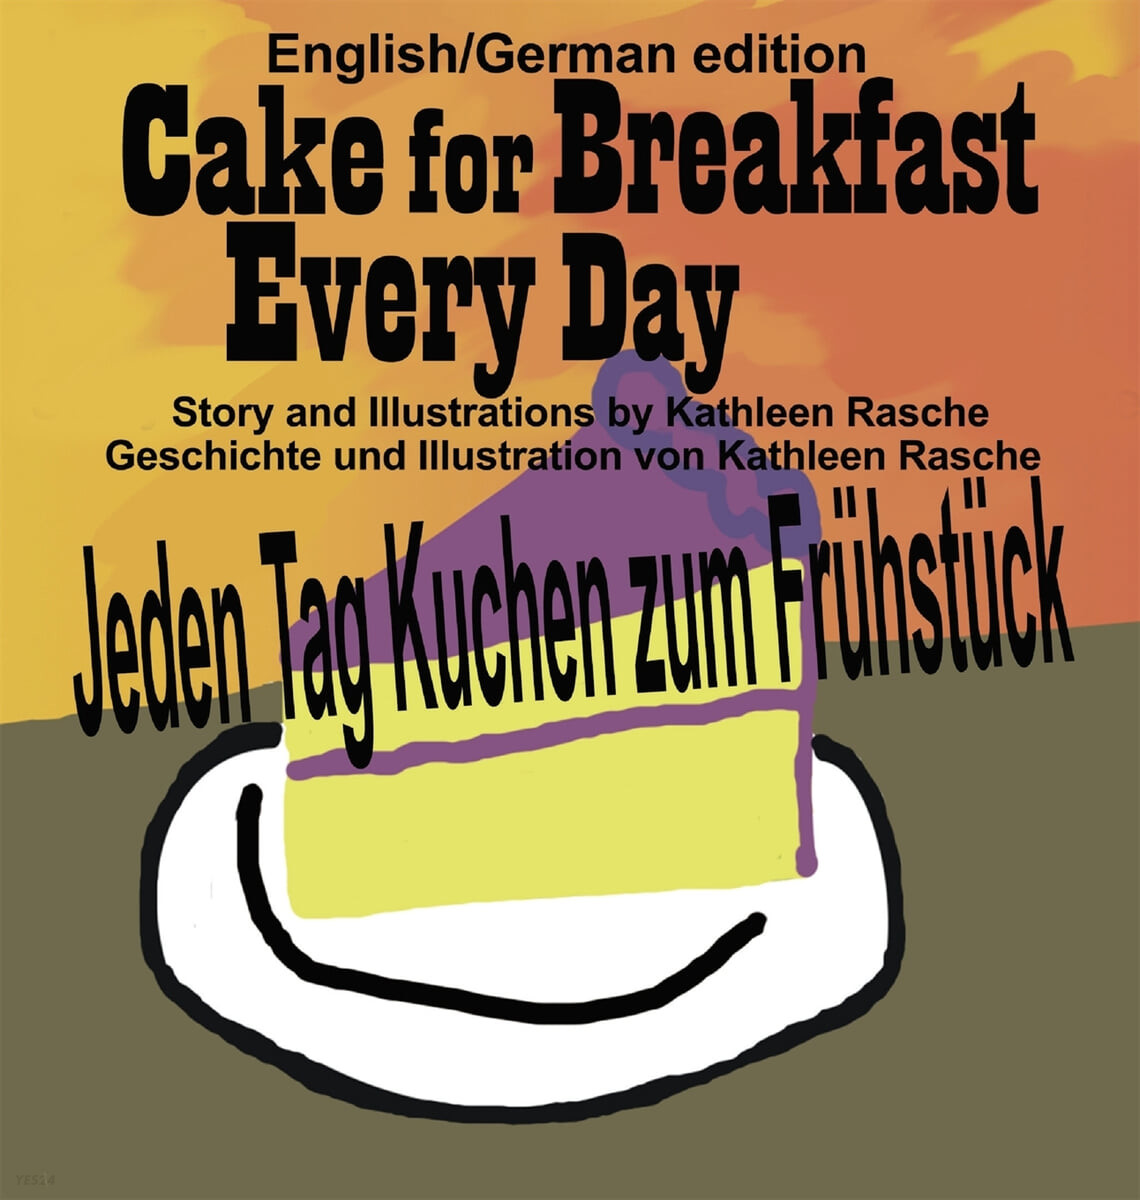 Cake for Breakfast Every Day - English/German edition